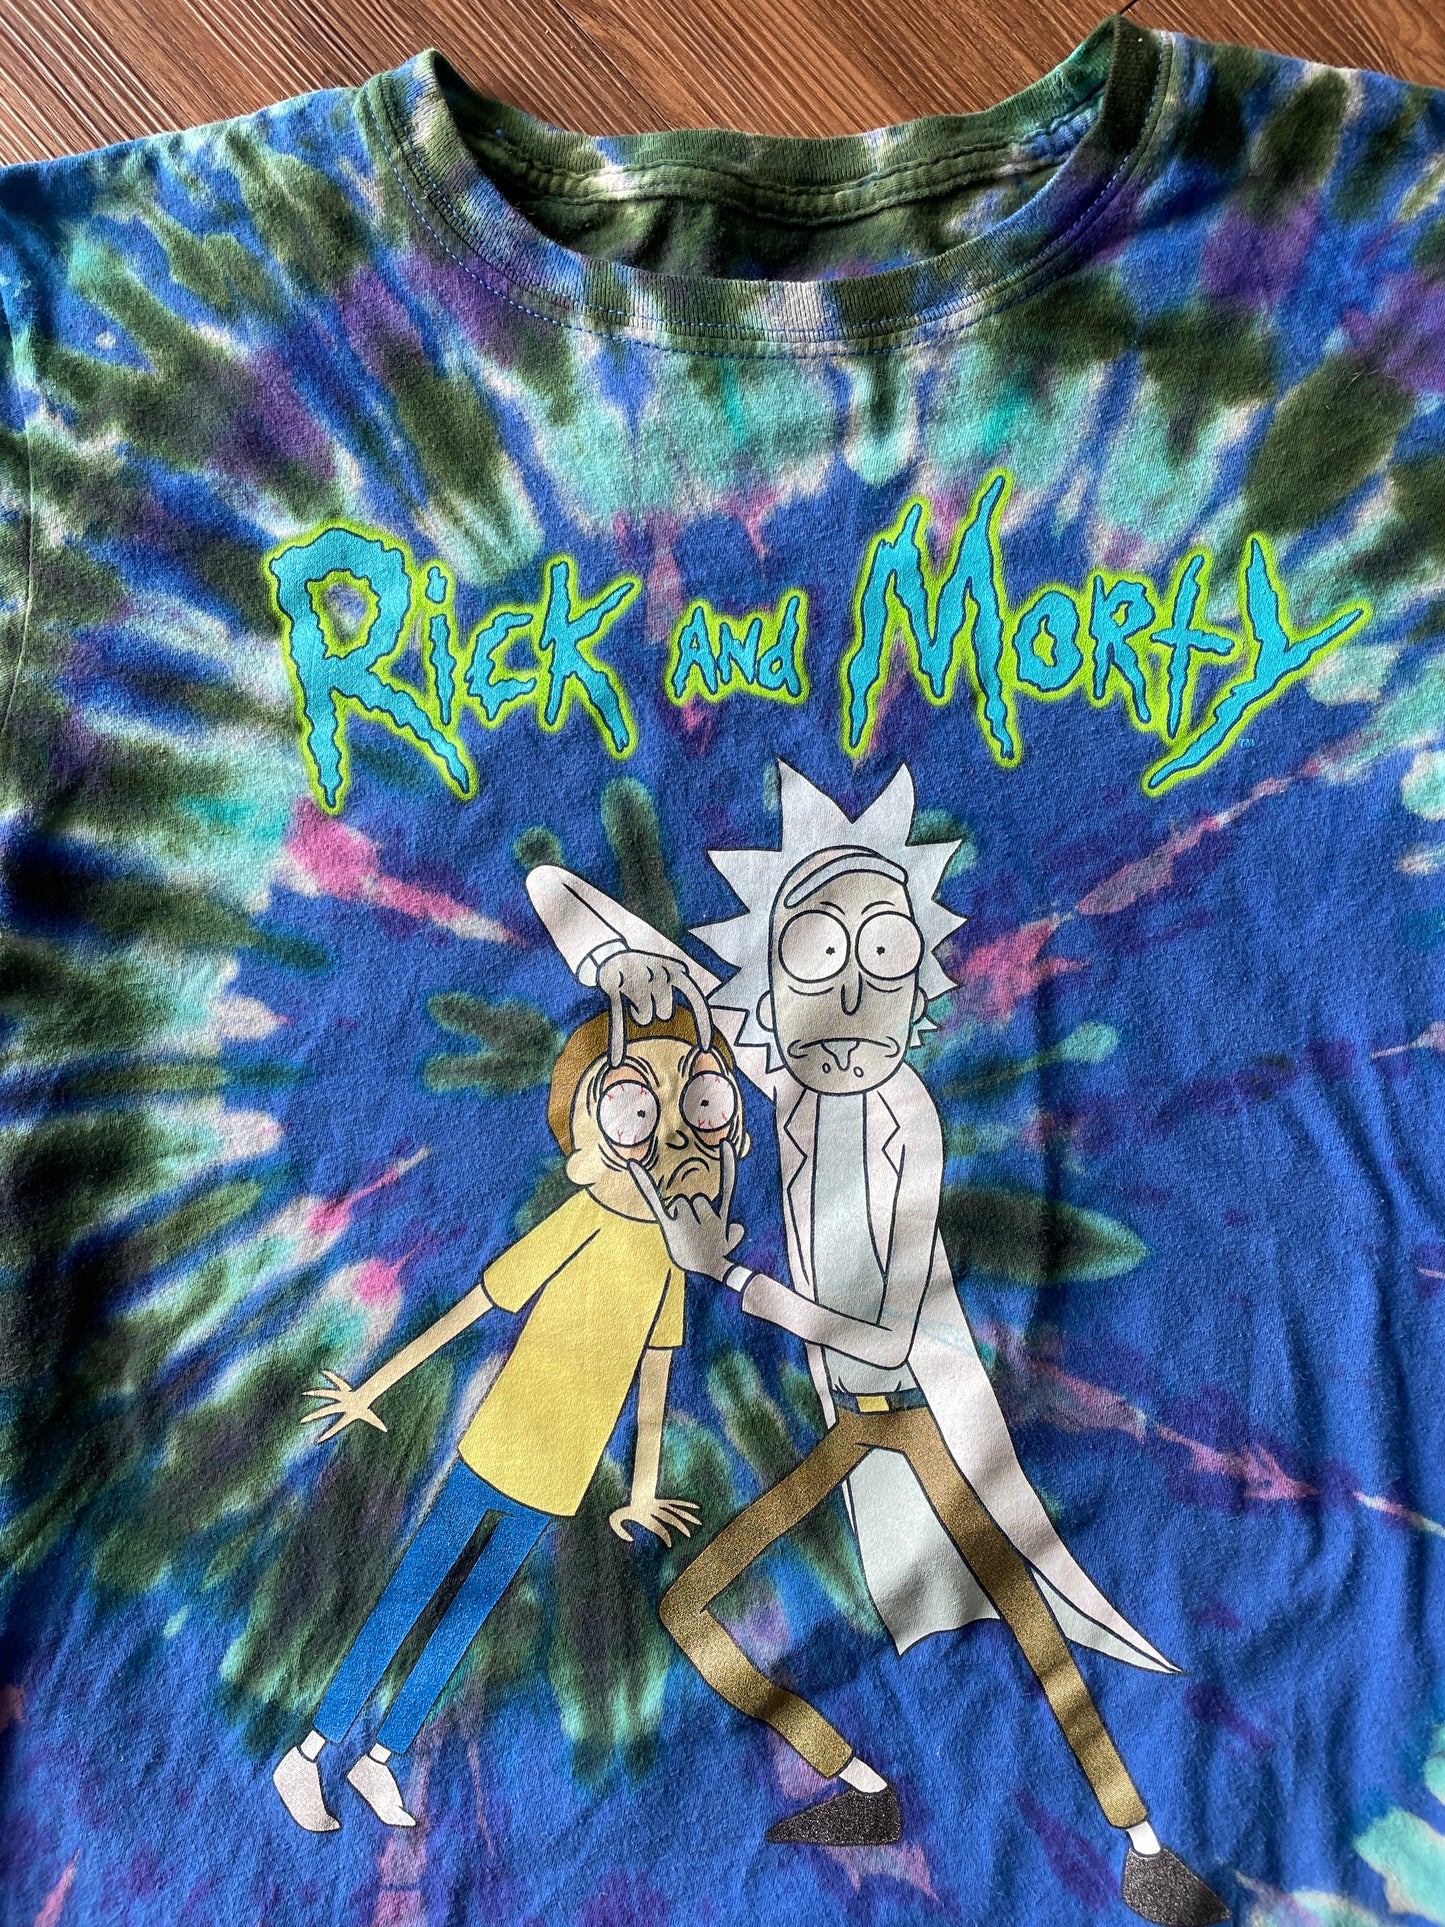 MEDIUM Men’s Rick and Morty Tie Dye T-Shirt | Blue and Green Open Your Eyes Morty Spiral Reverse Tie Dye Short Sleeve